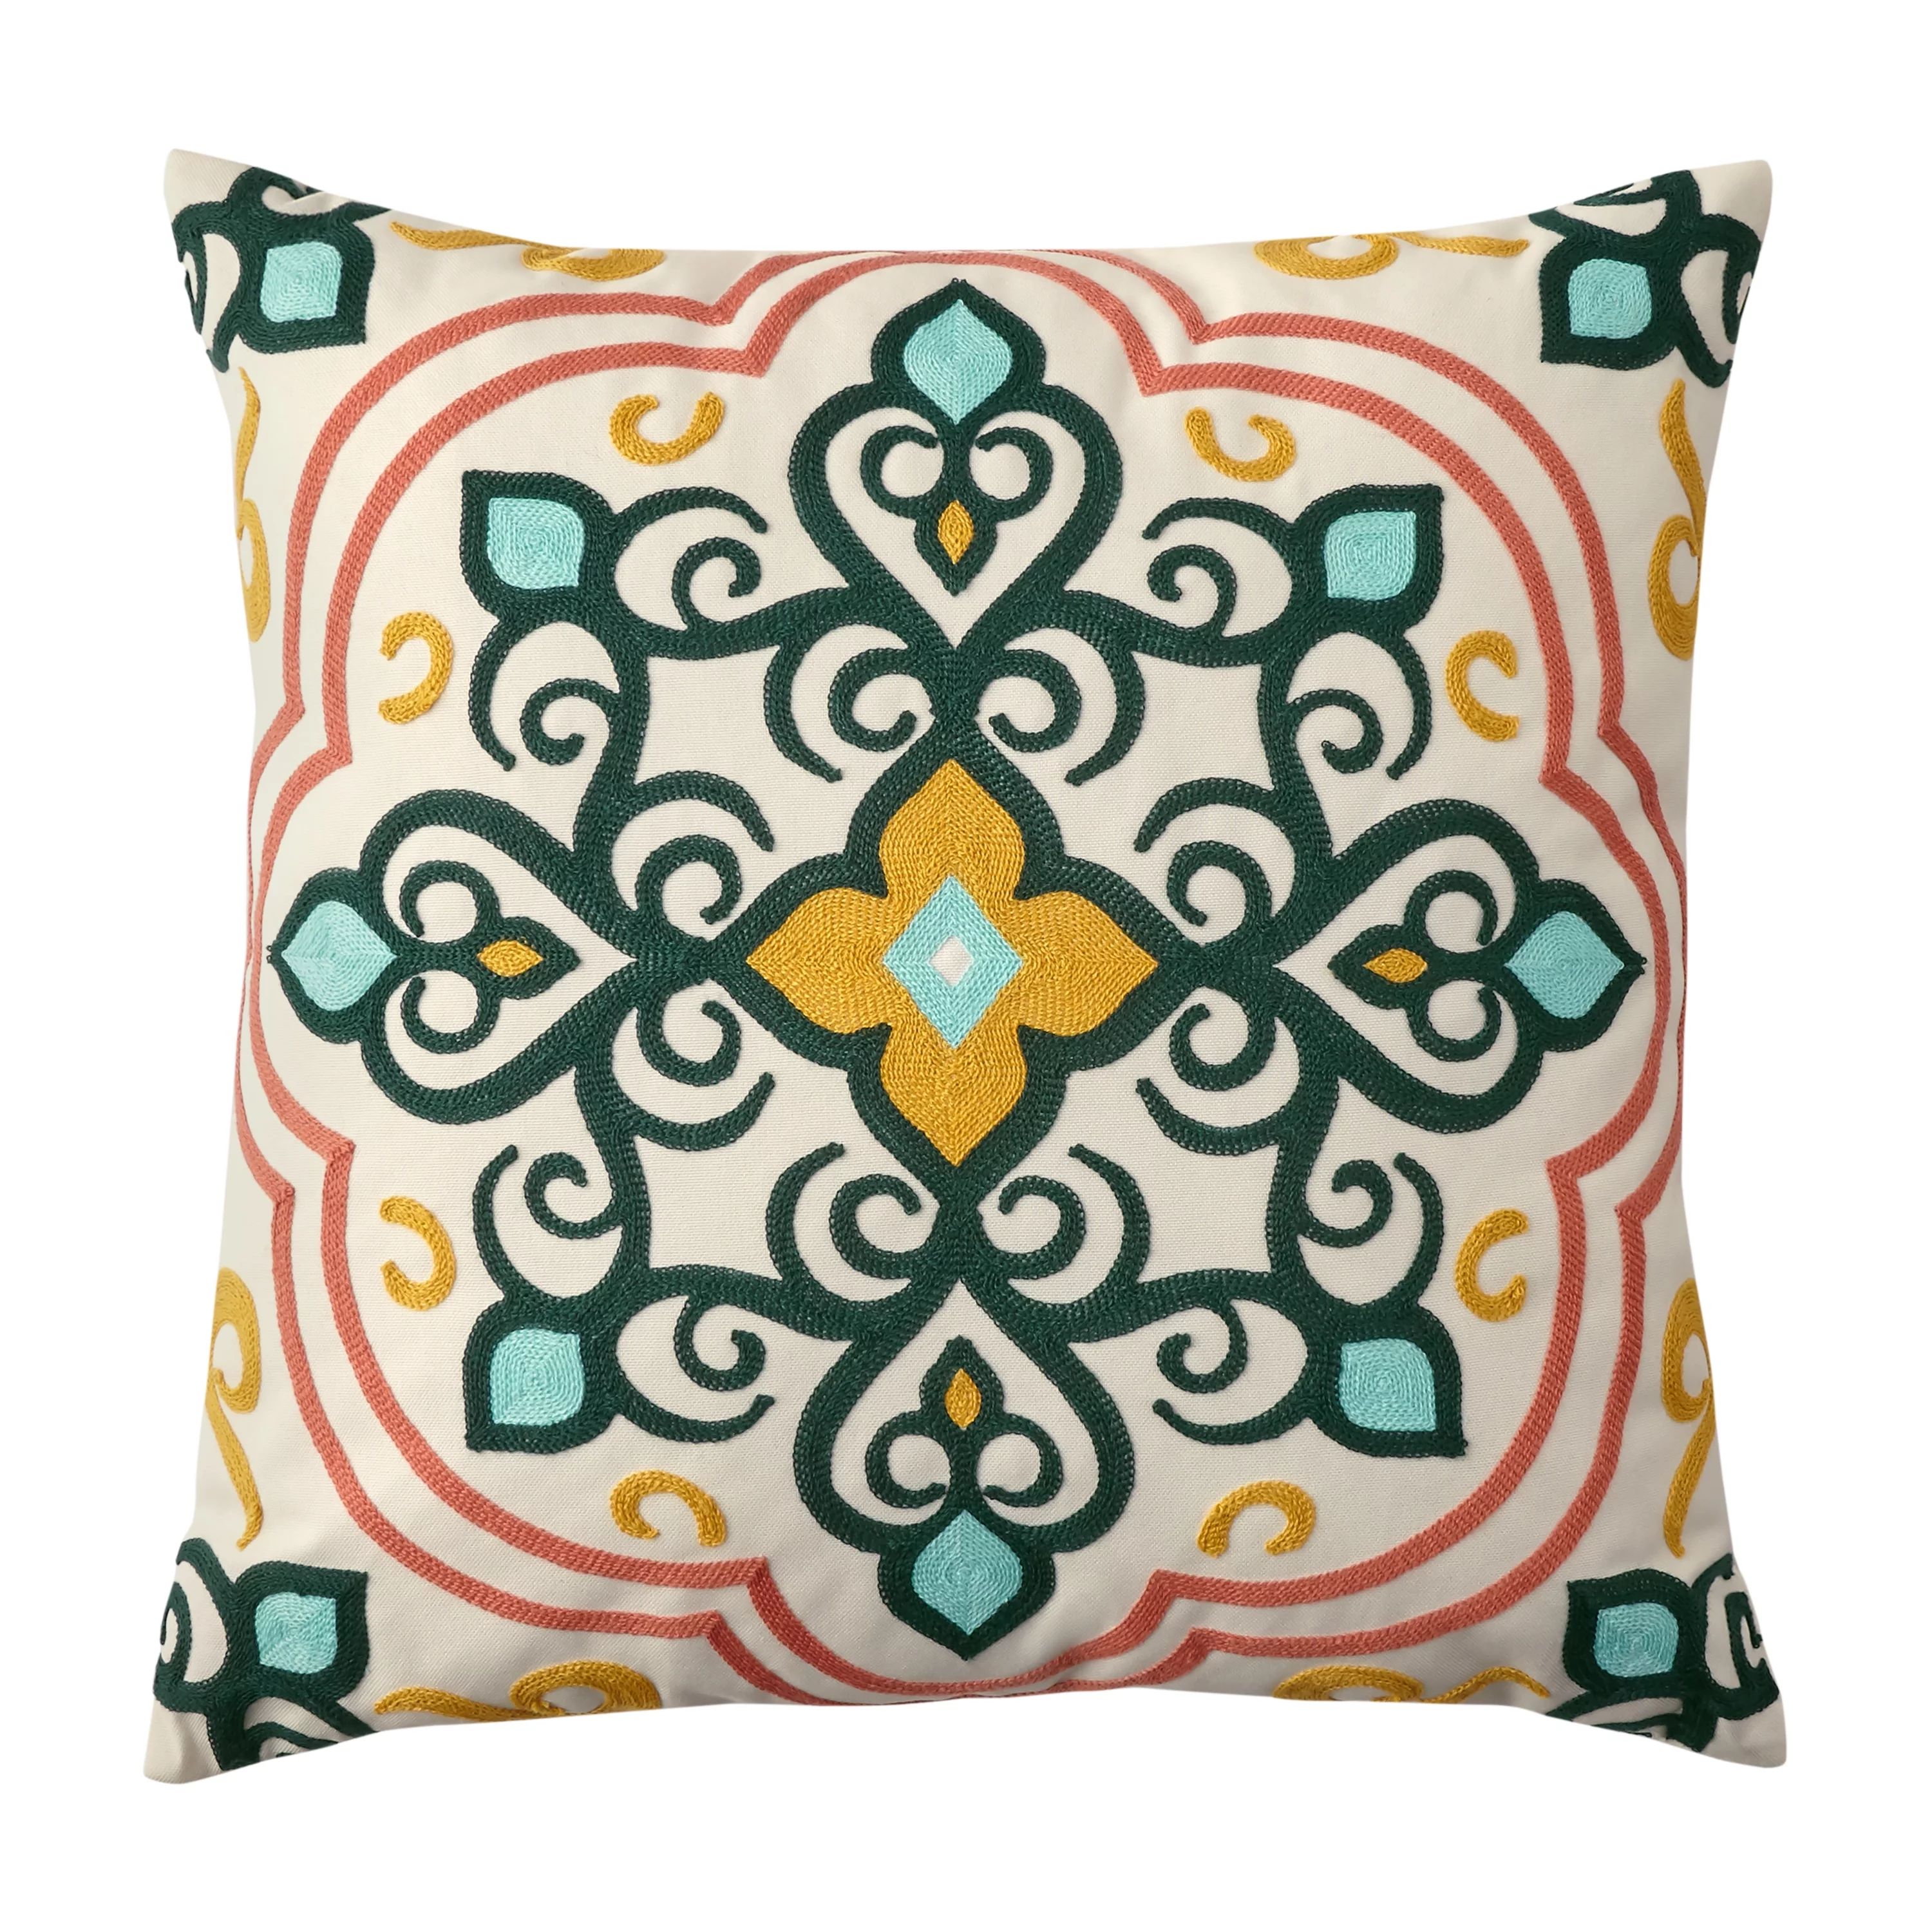 Better Homes & Gardens 19" x 19" Square Medallion Outdoor Toss Pillow, Multi-color, 1 Pack - Walm... | Walmart (US)